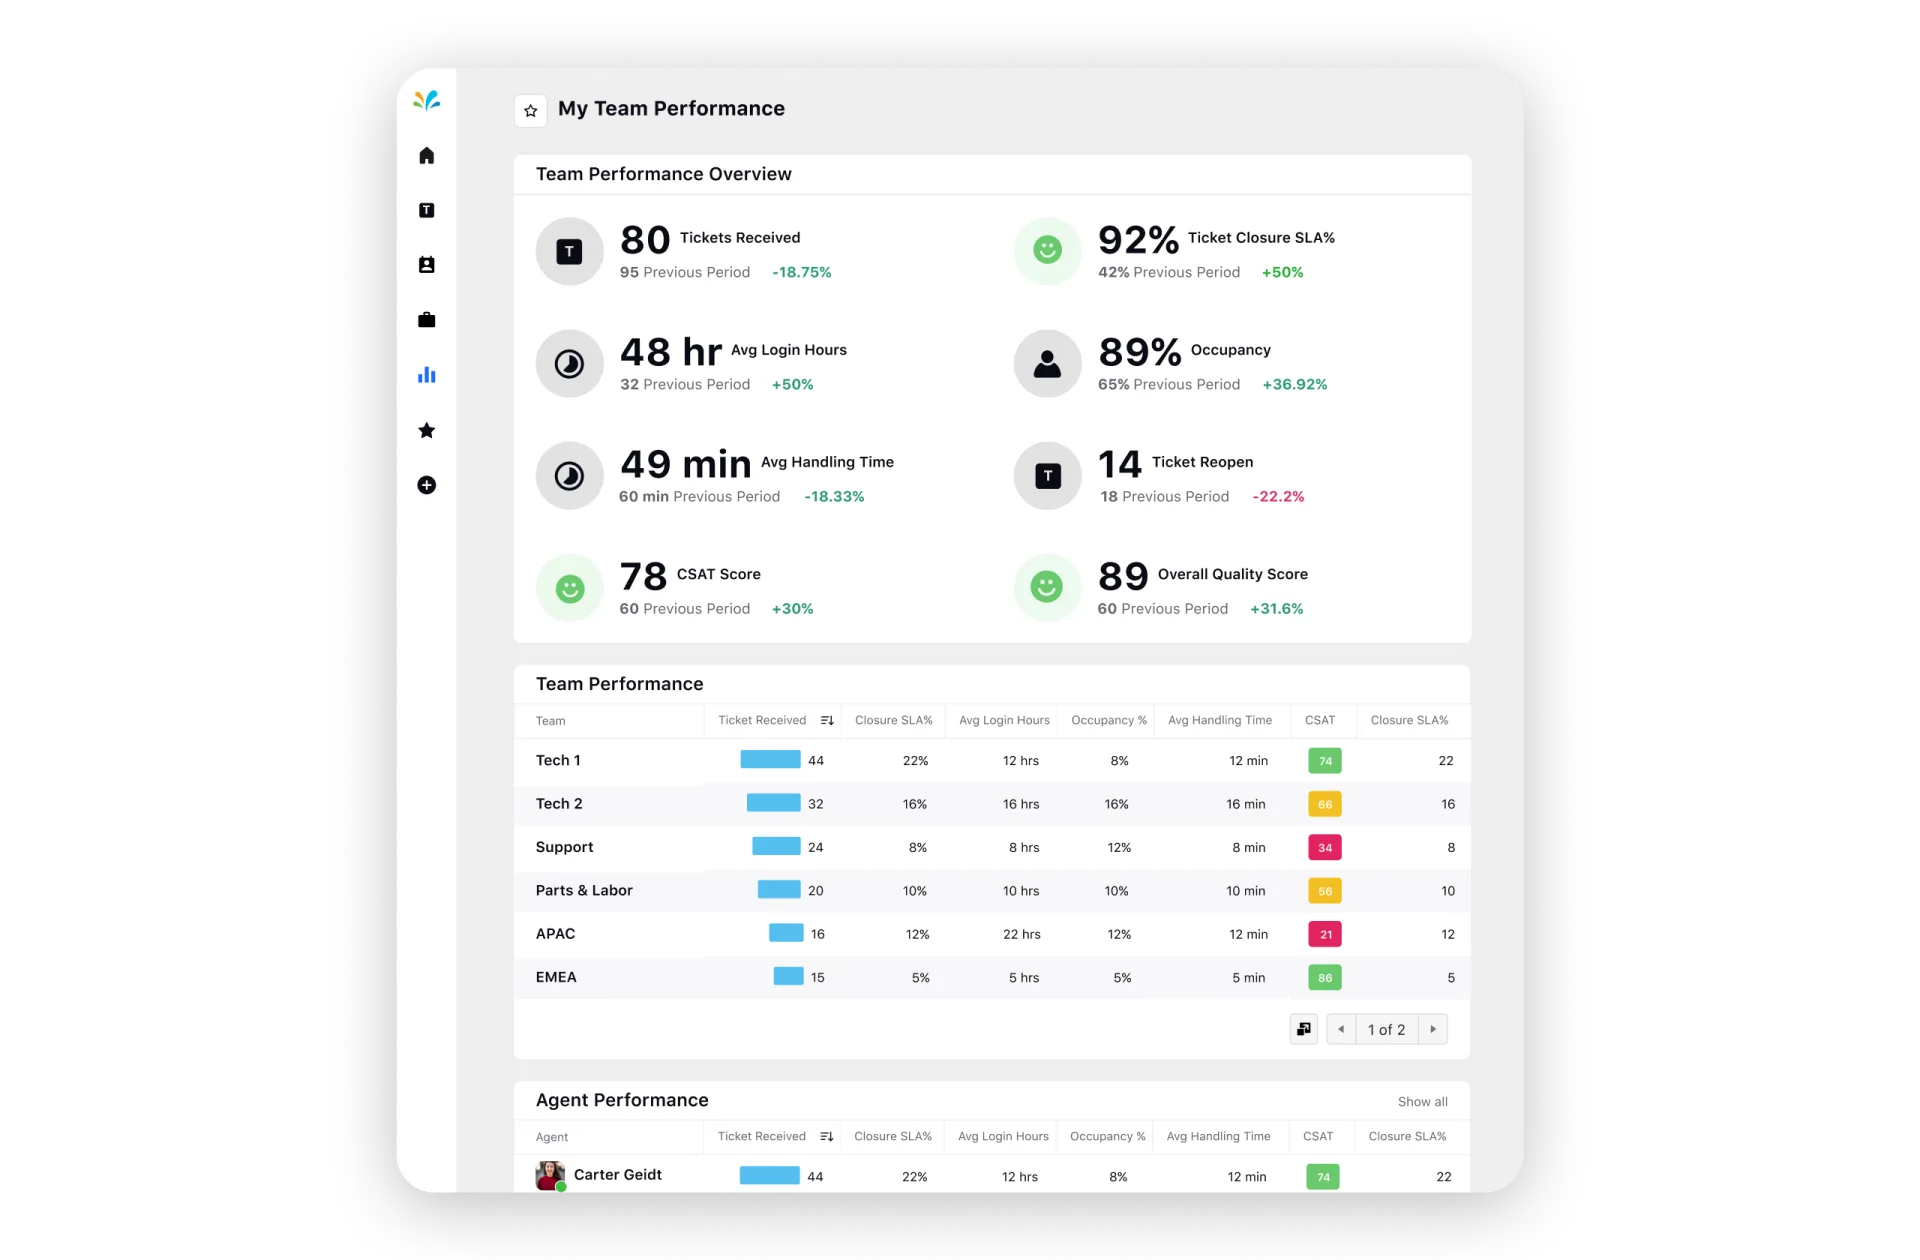 Contact Center Supervisor View Powered by Sprinklr Service